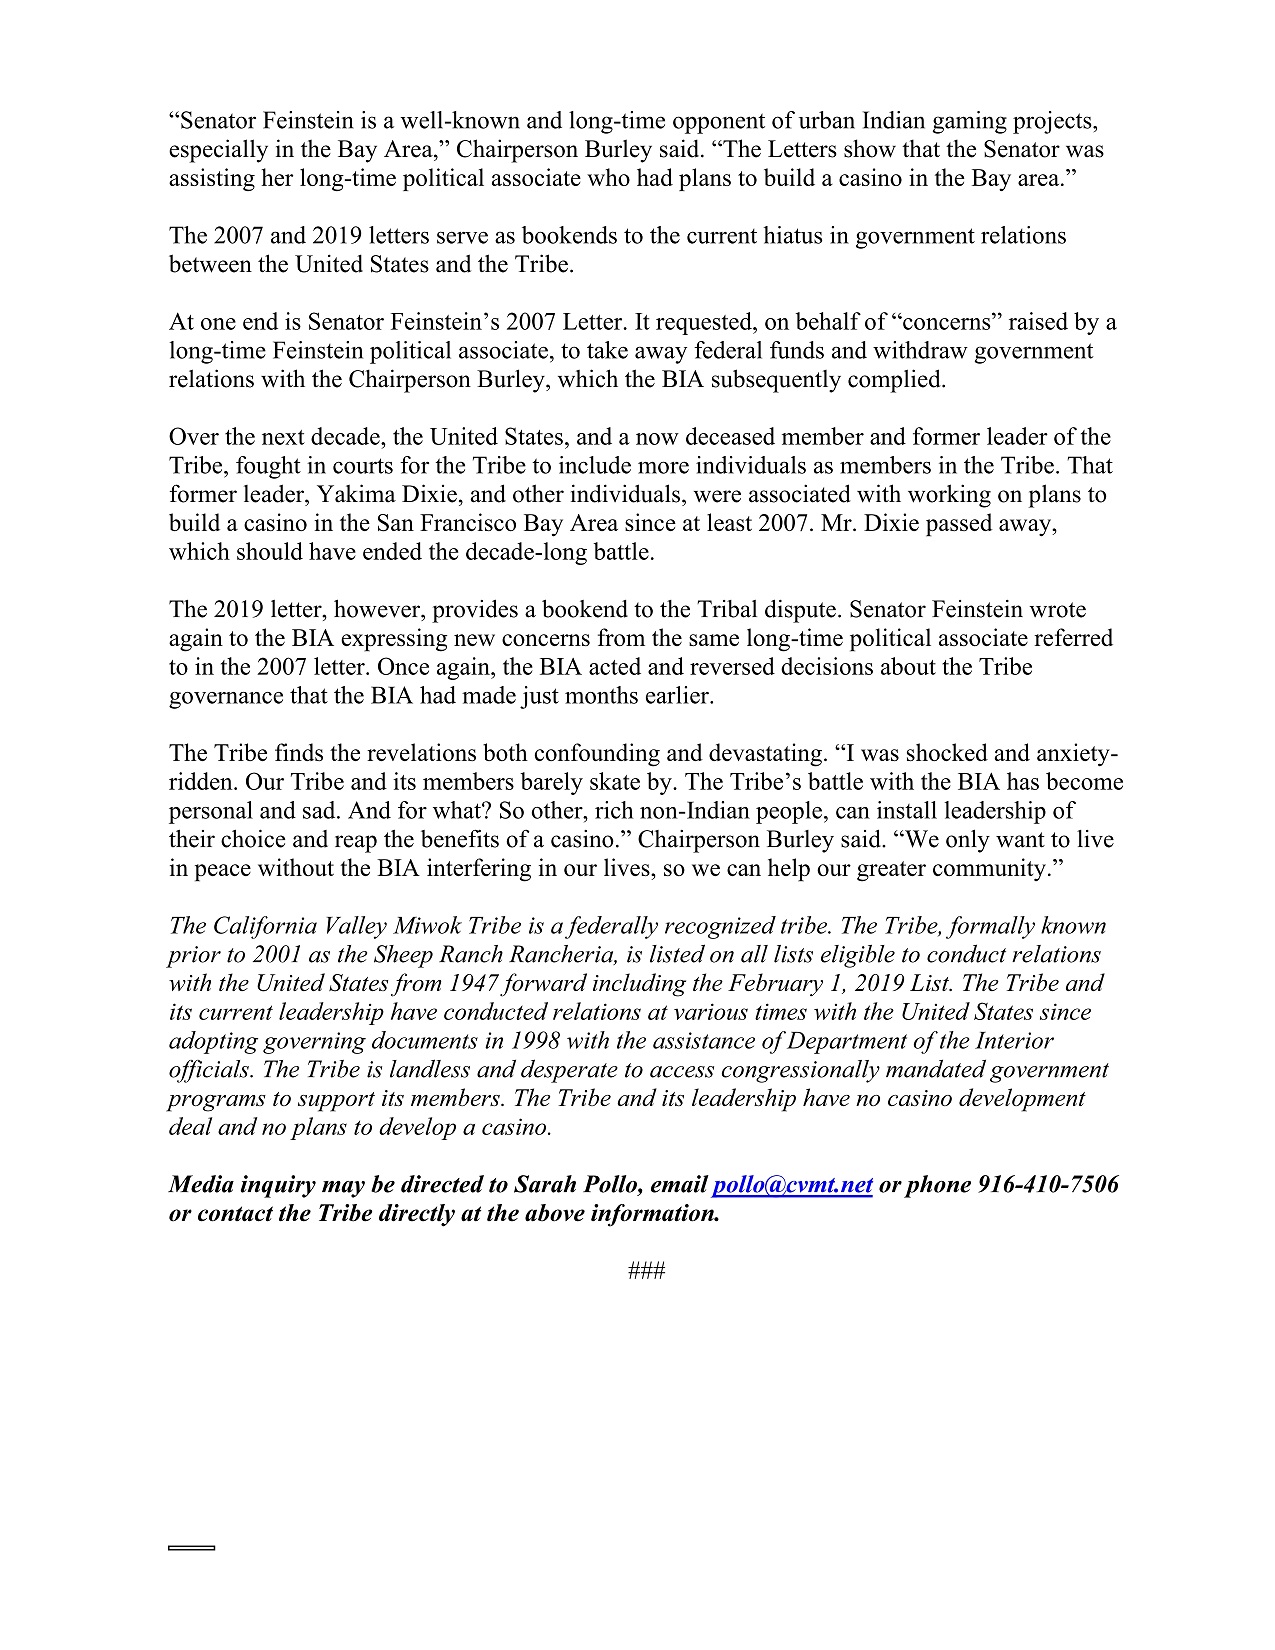 Official tribal press release